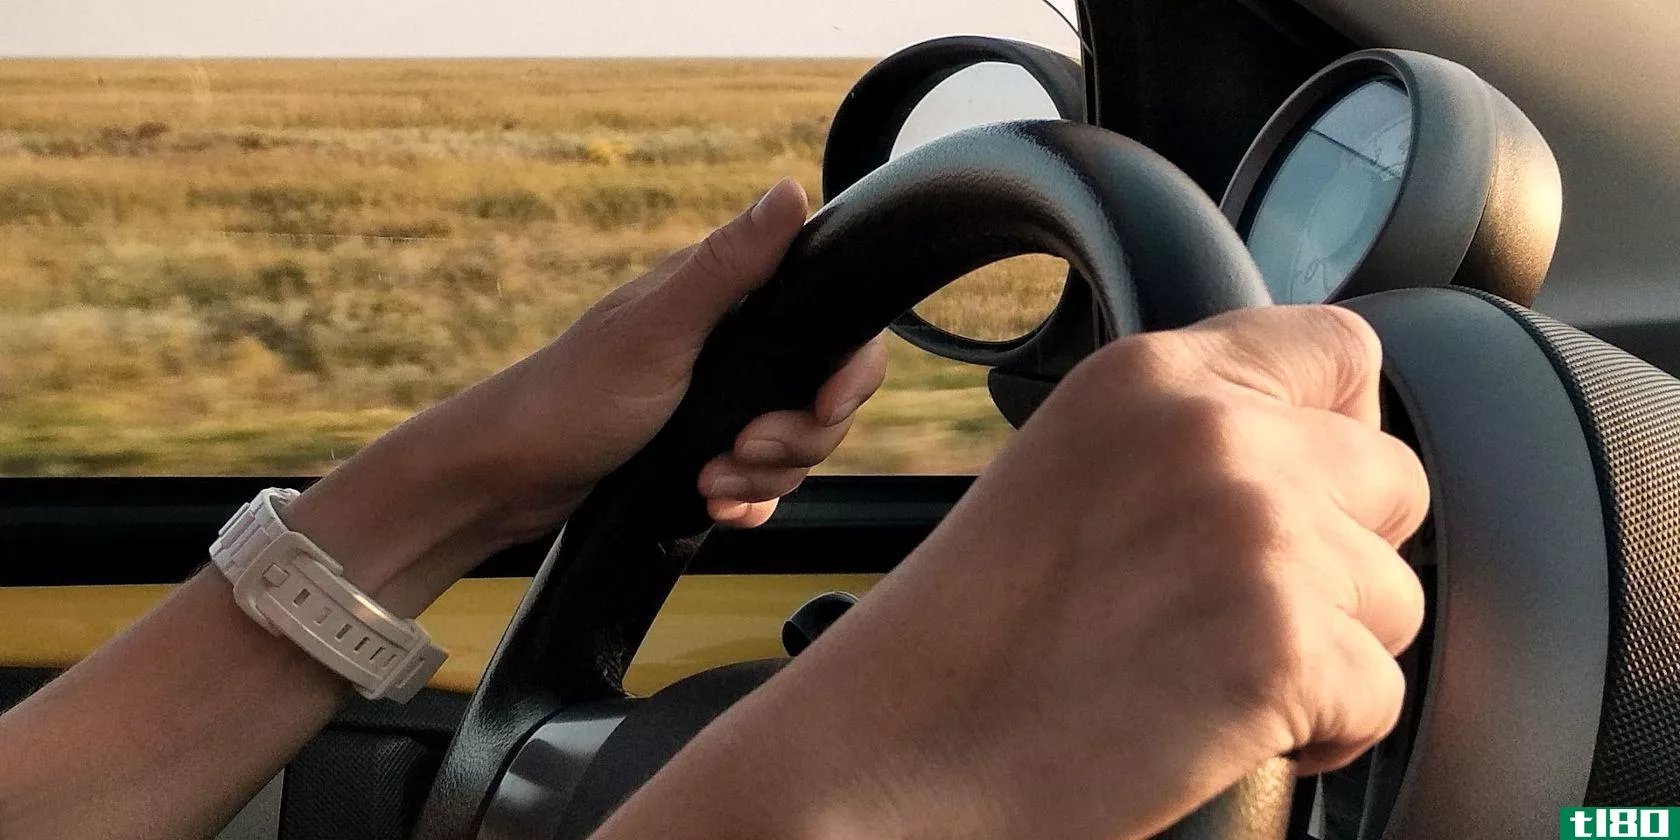 Female Hands on Steering Wheel While Driving